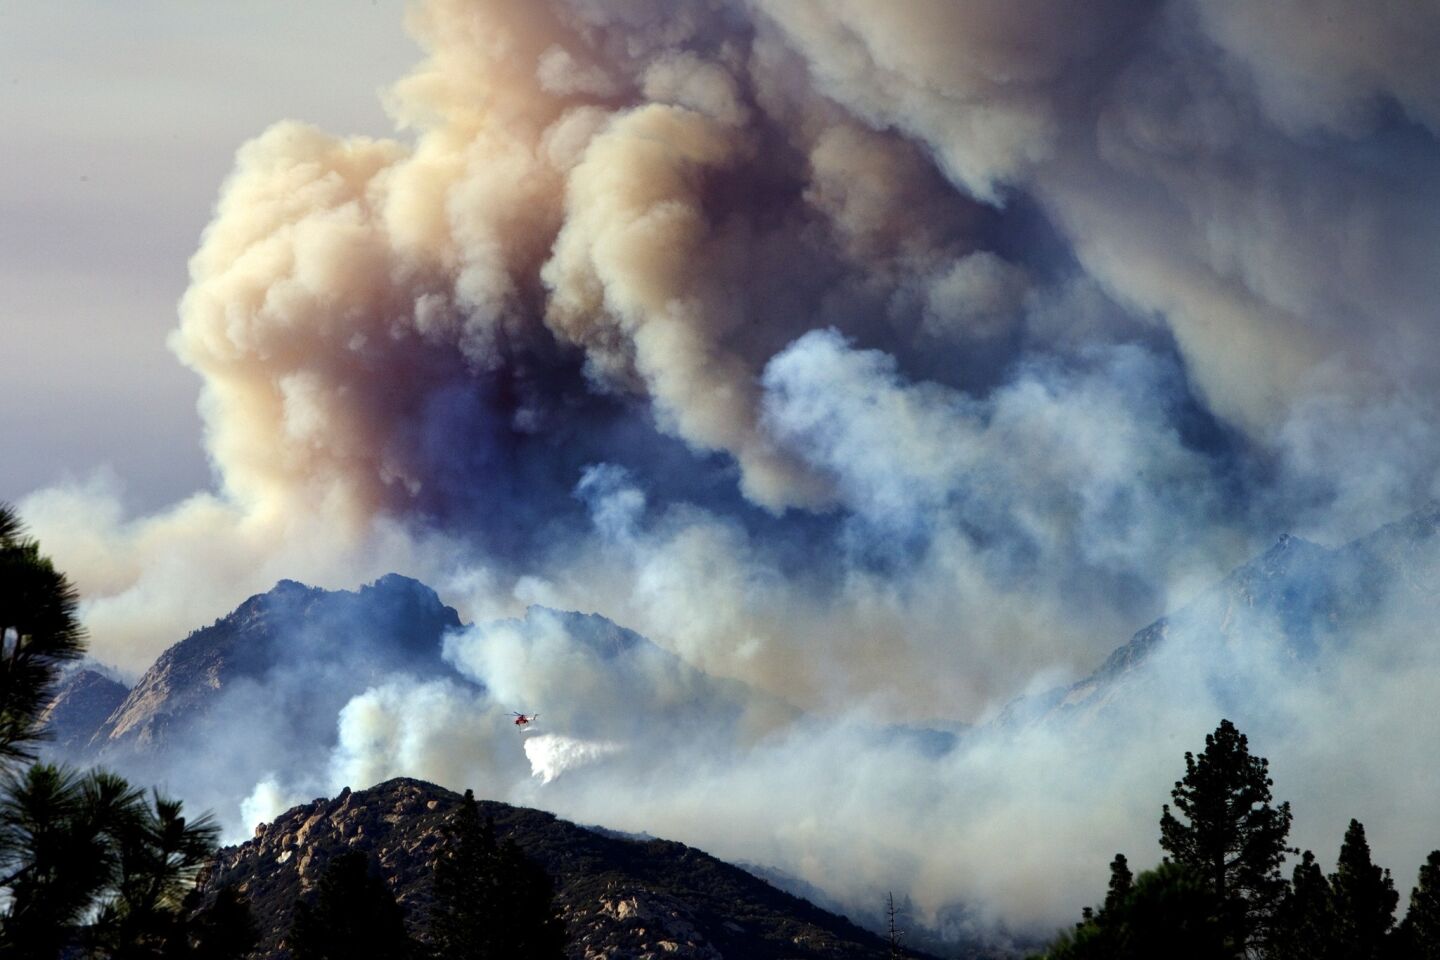 The Mountain fire burns out of control, forcing evacuations off Highway 74.